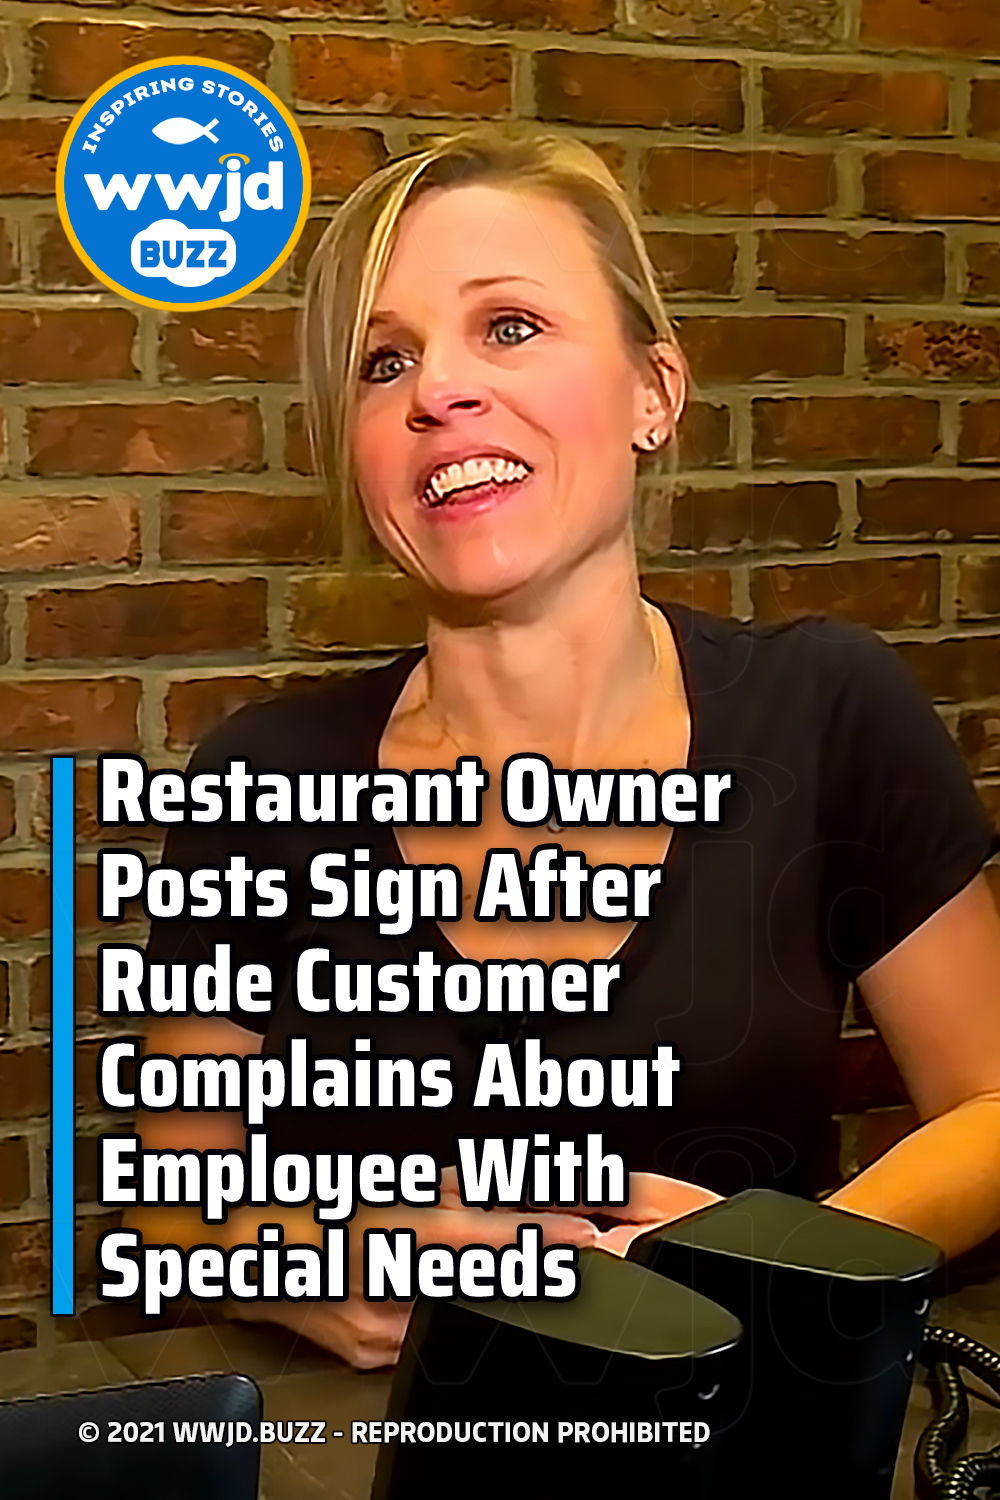 Restaurant Owner Posts Sign After Rude Customer Complains About Employee With Special Needs